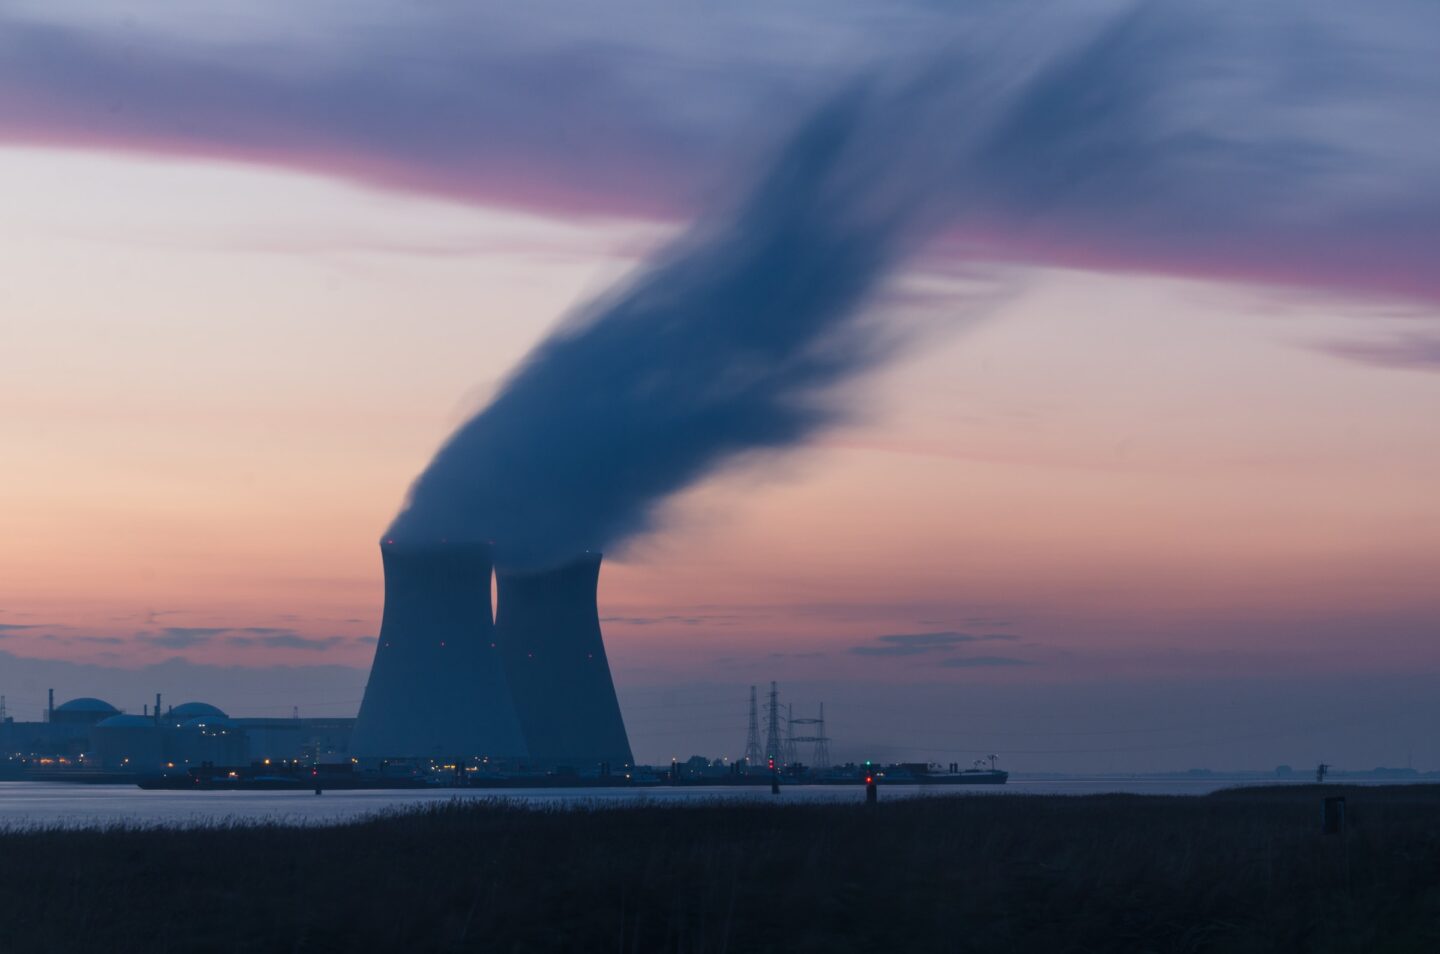 Power supply disruptions, high electricity prices. Even the nuclear will not be enough for Poland